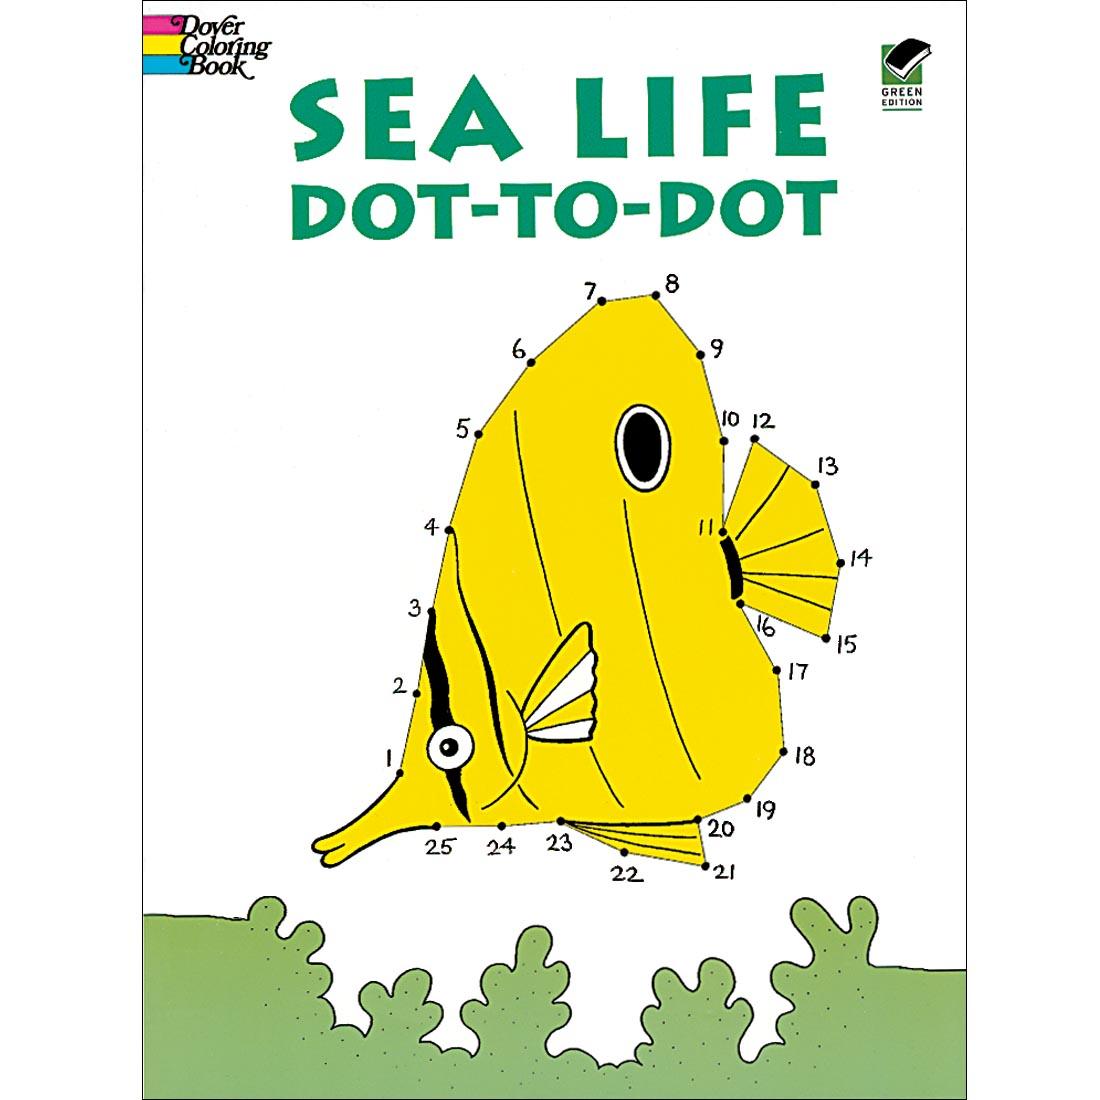 Sea Life Dot-To-Dot Coloring Book by Dover